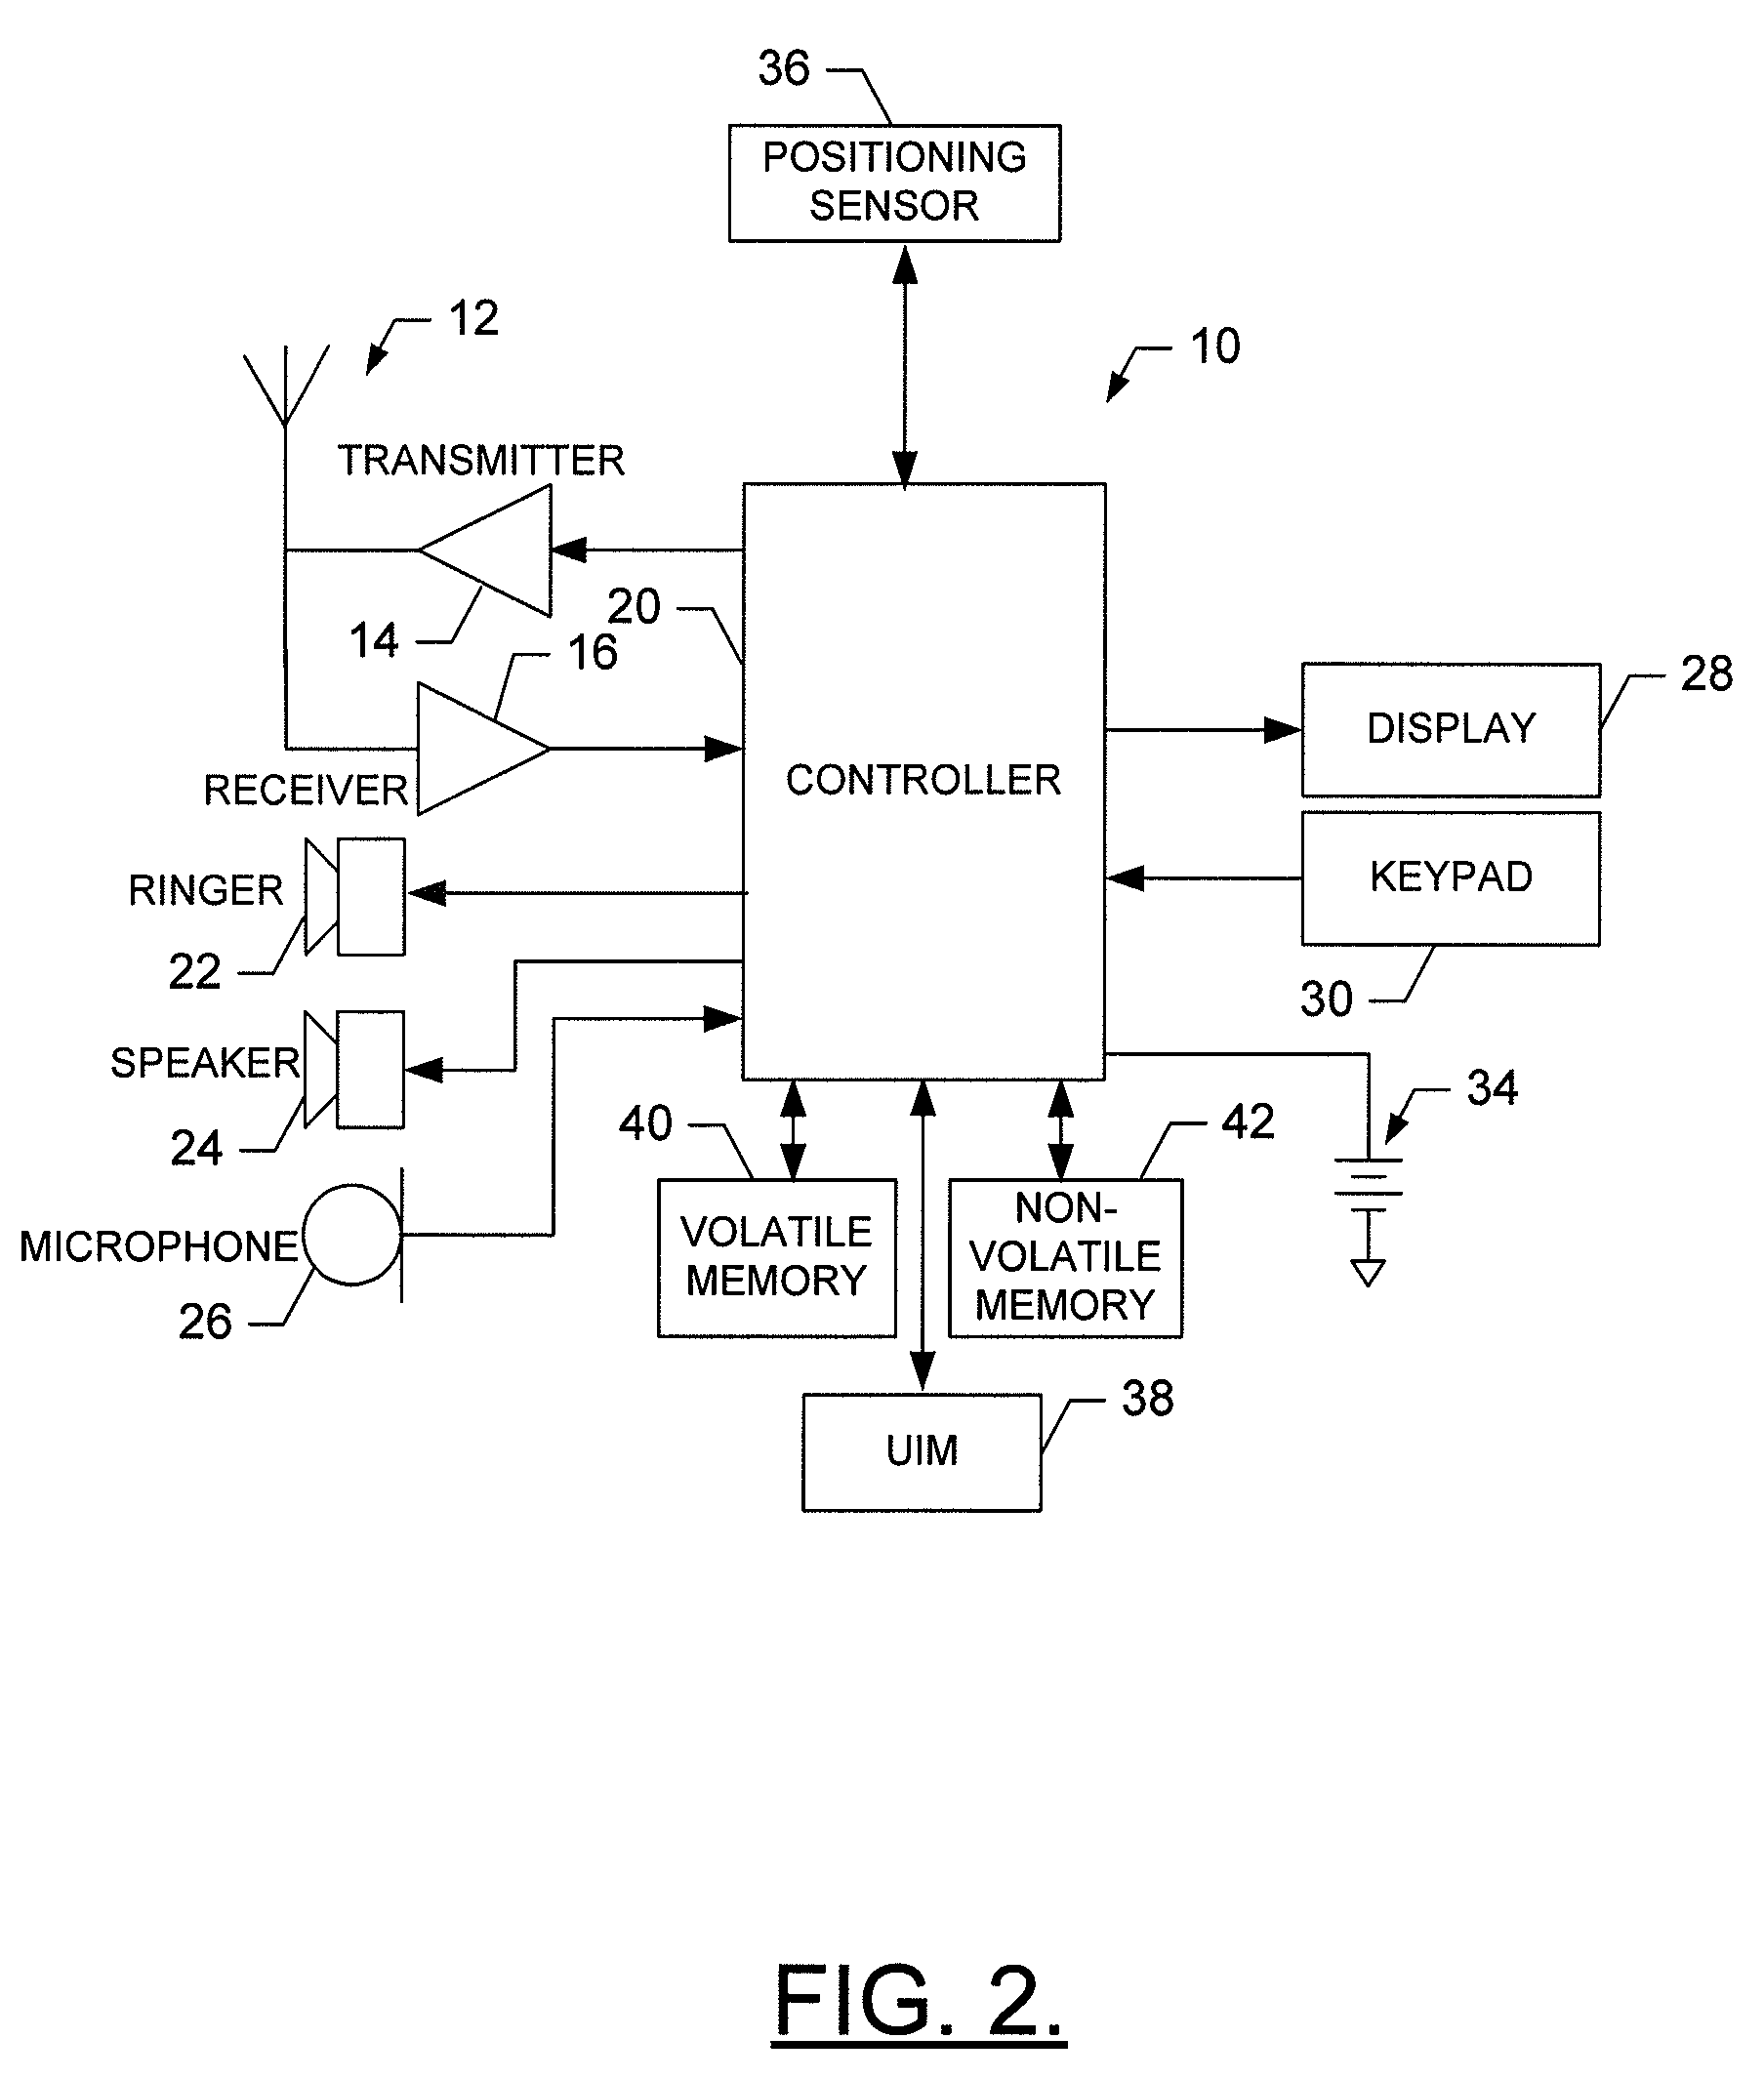 Method, apparatus and computer program product for providing synchronized navigation